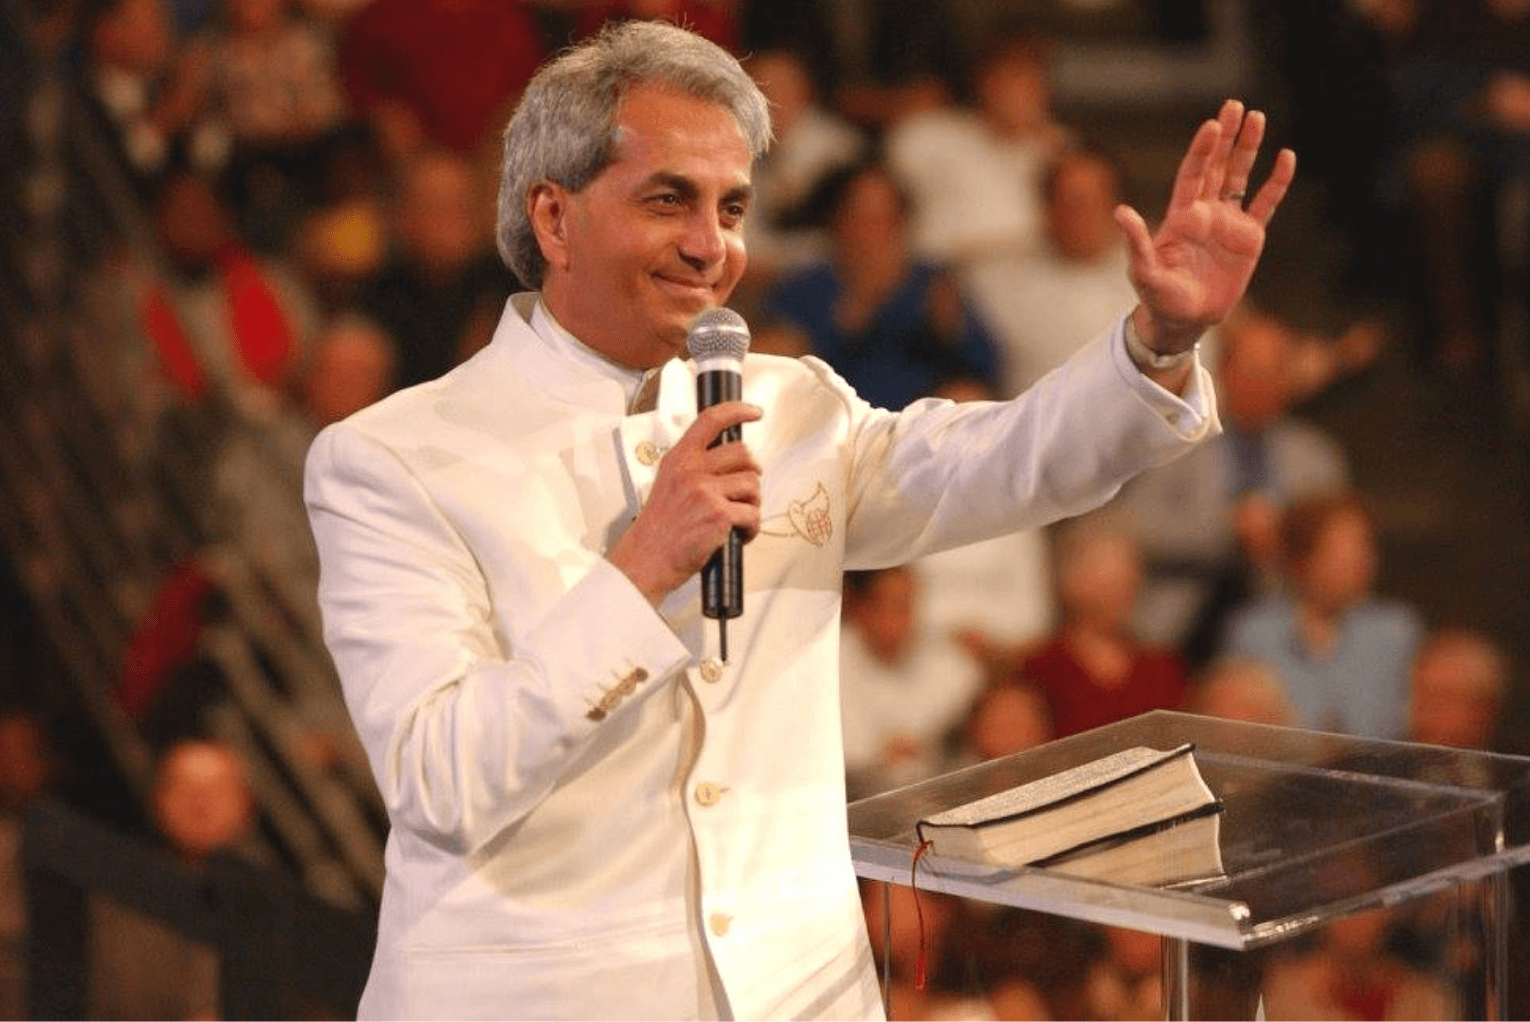 Benny Hinn: ‘I’m a Human Being. I’ve Made Mistakes’